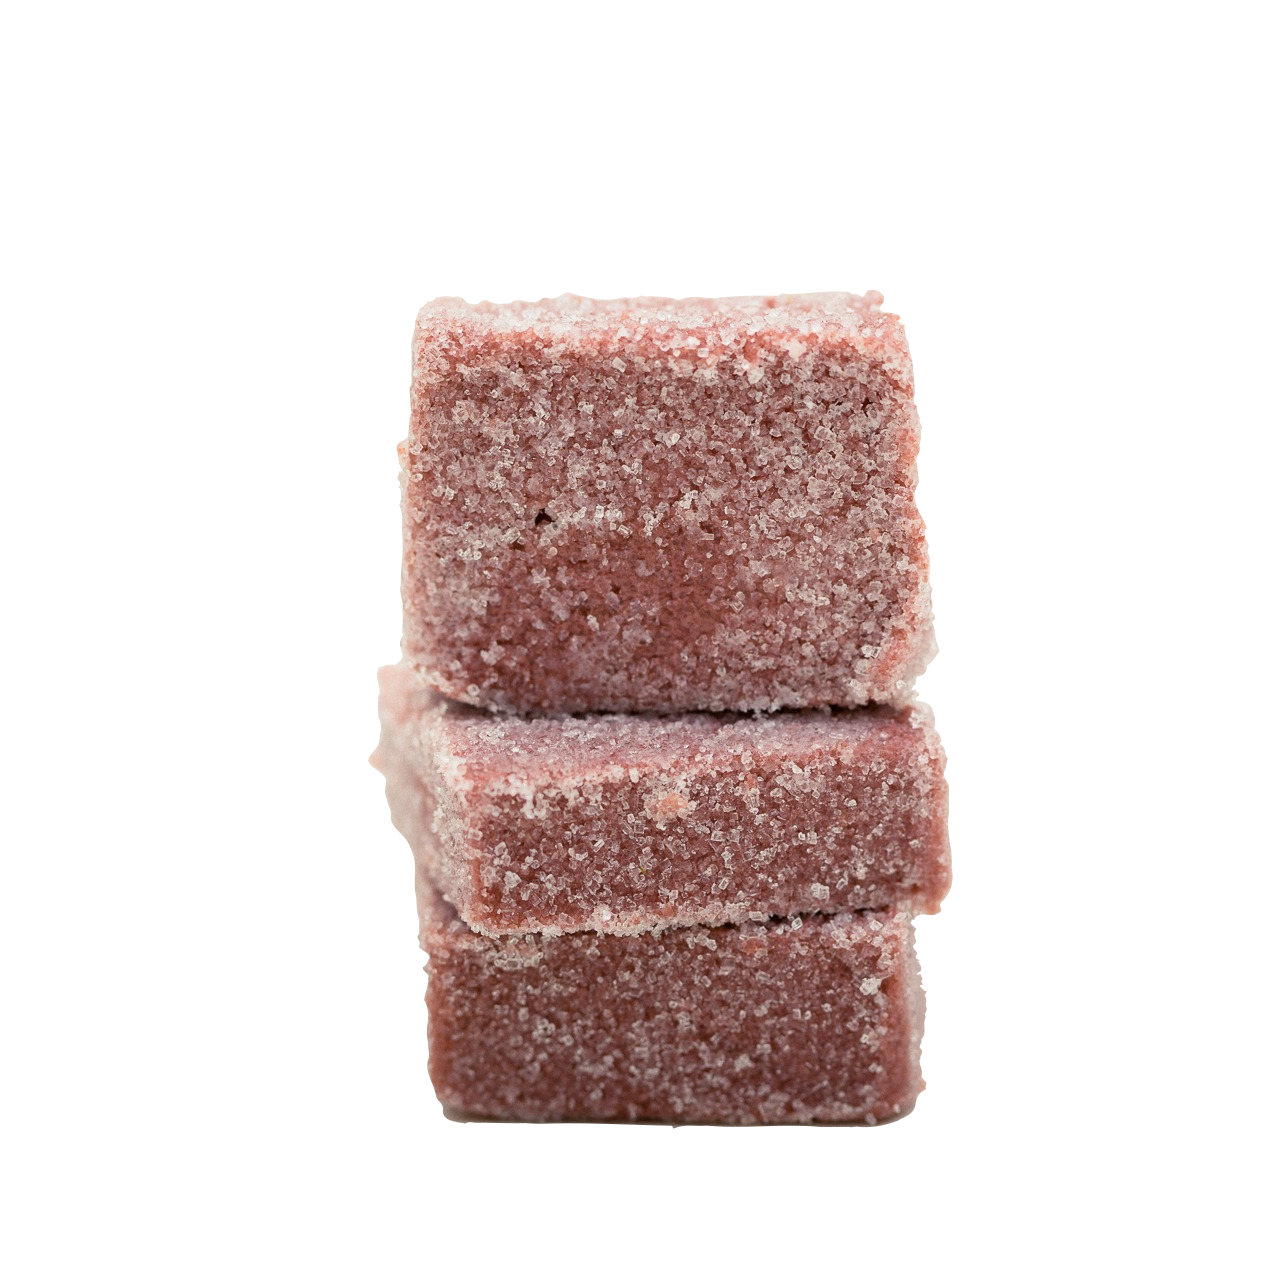 Stack of exfoliating Moxxie Sugar Scrub cubes, hand made in the US with all natural ingredients & pure essential oils